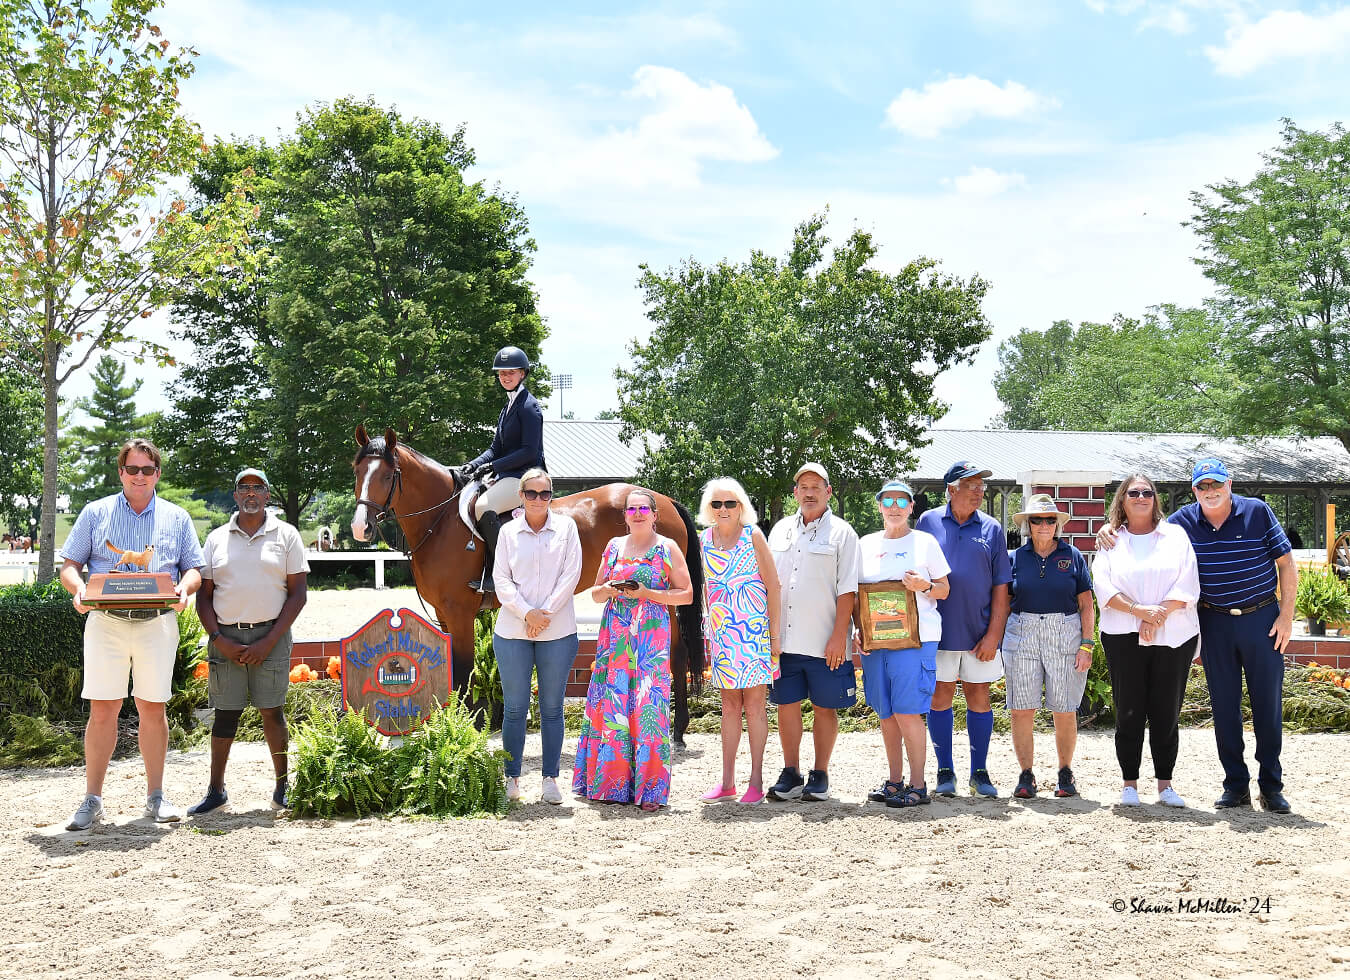 Isabella and Inquisitive finish 5th at the Robert Murphy Memorial Classic in Lexington (Kentucky)